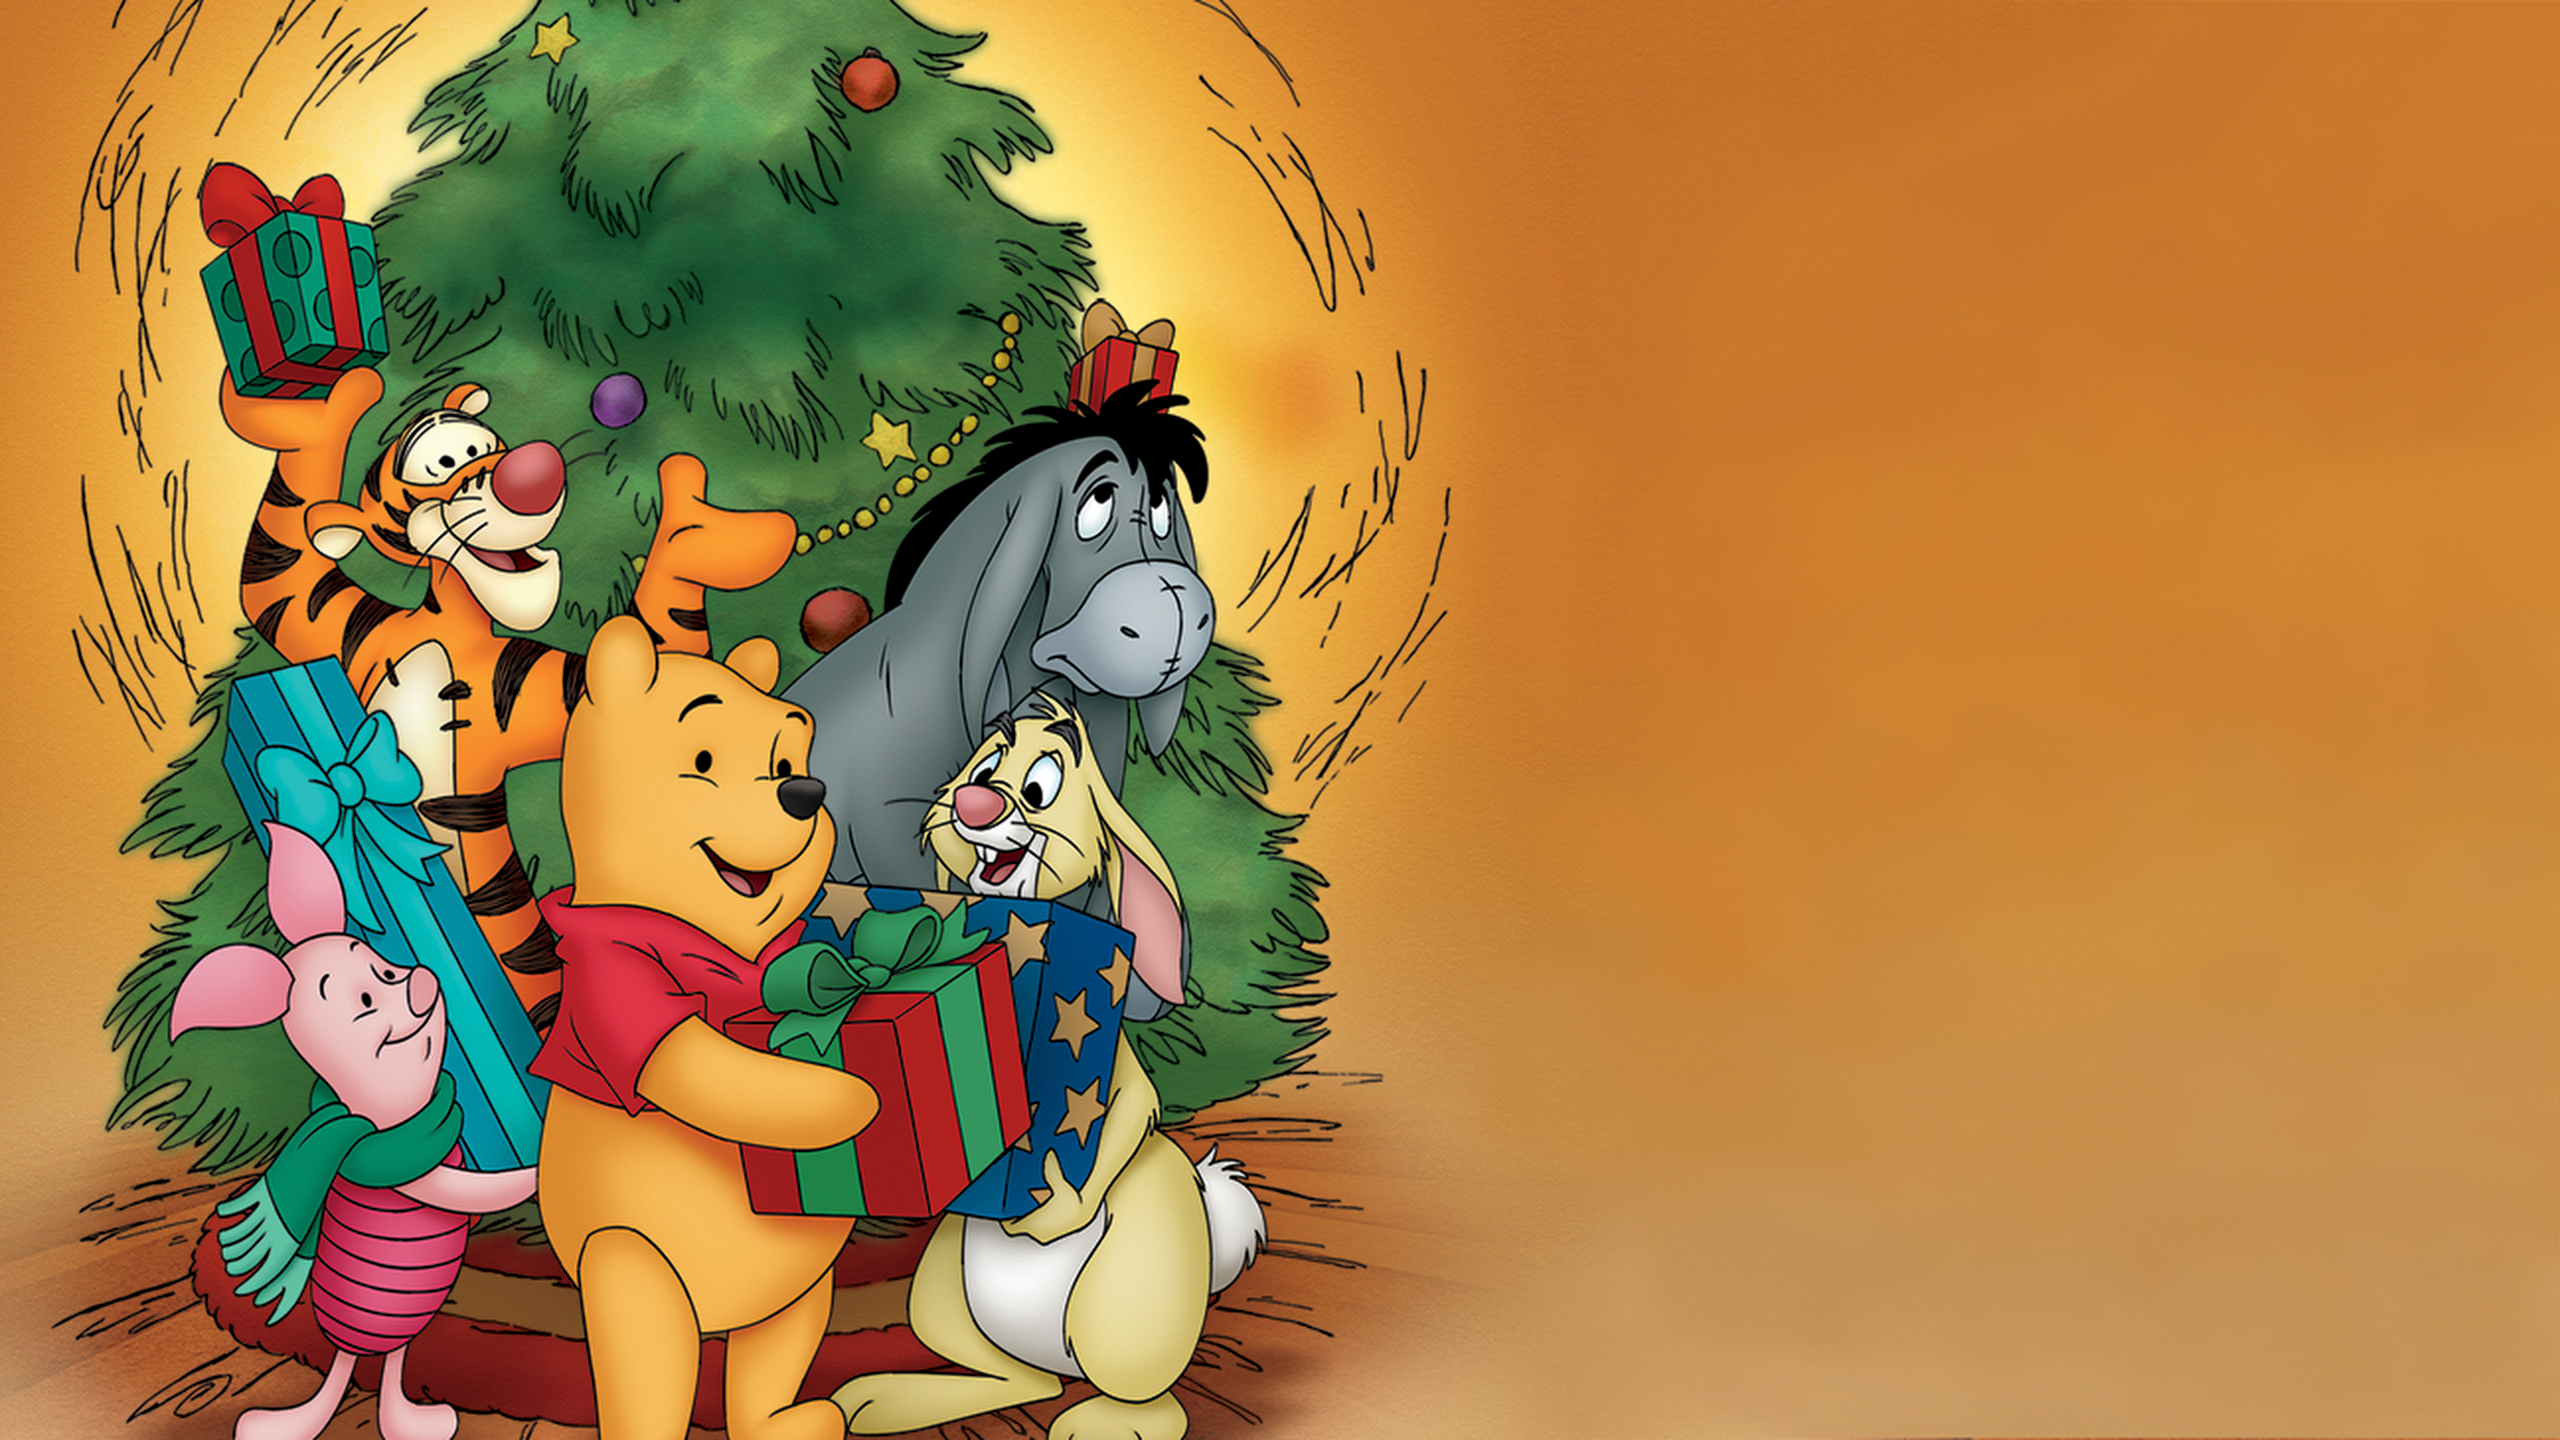 Winnie the pooh a very merry pooh year movies anywhere